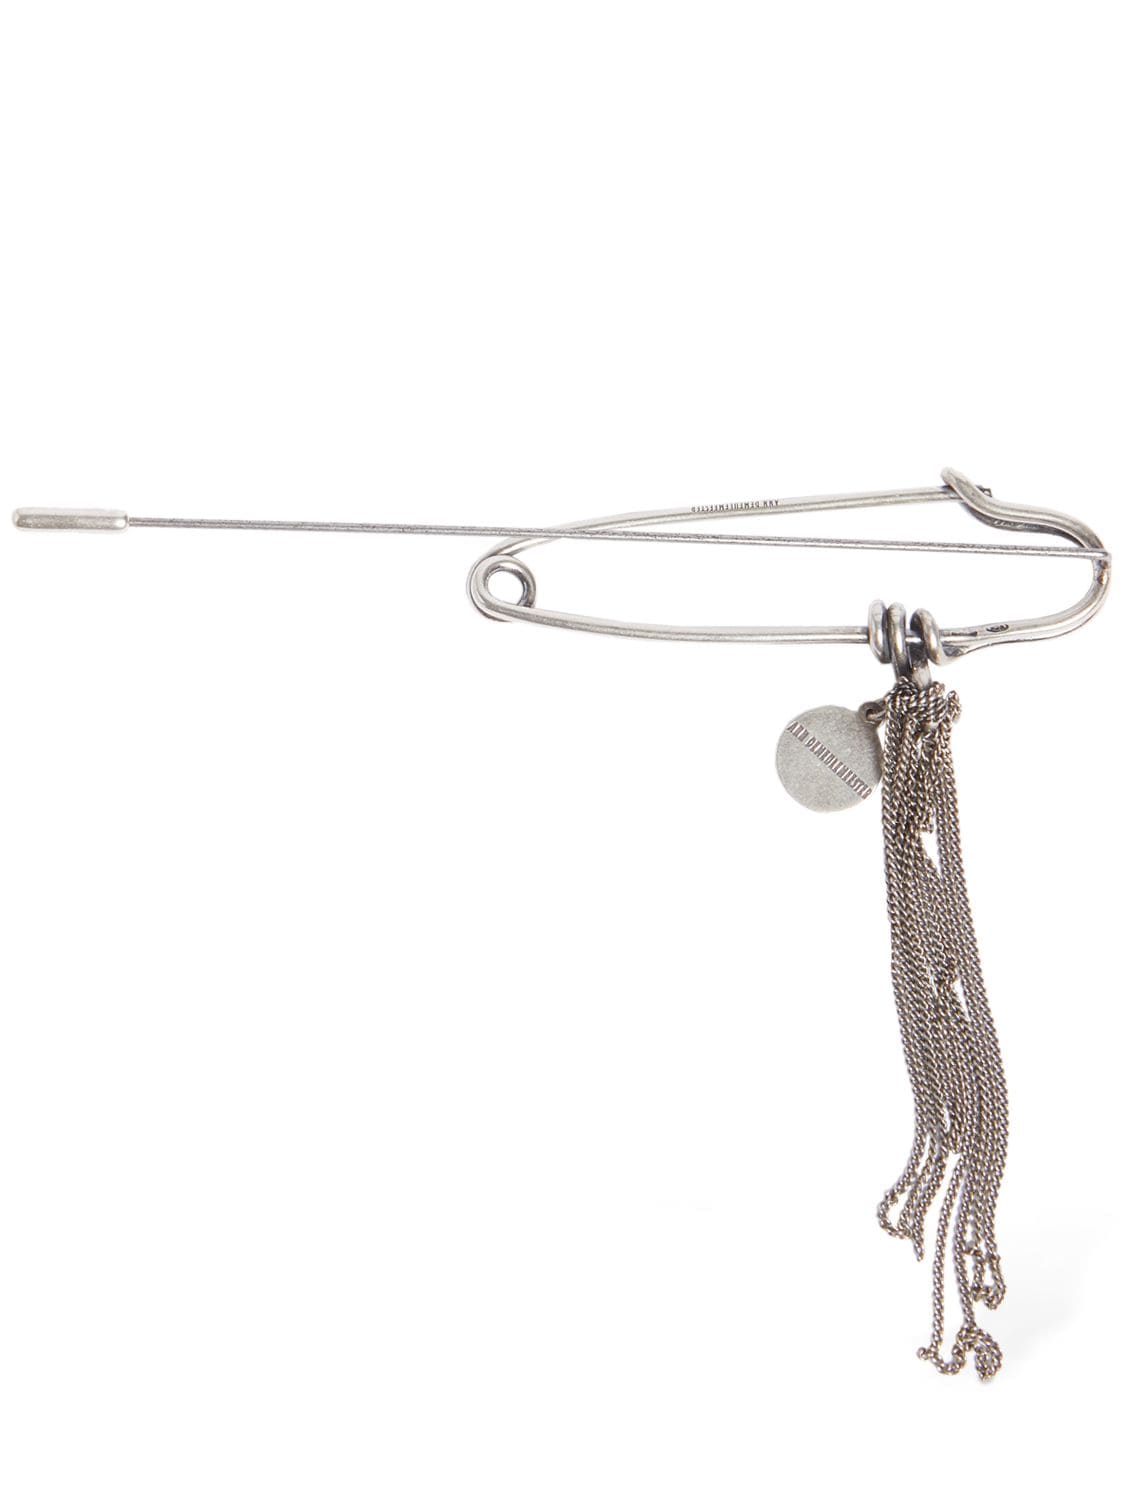 Image of Kasu Safety Pin W/ Chains